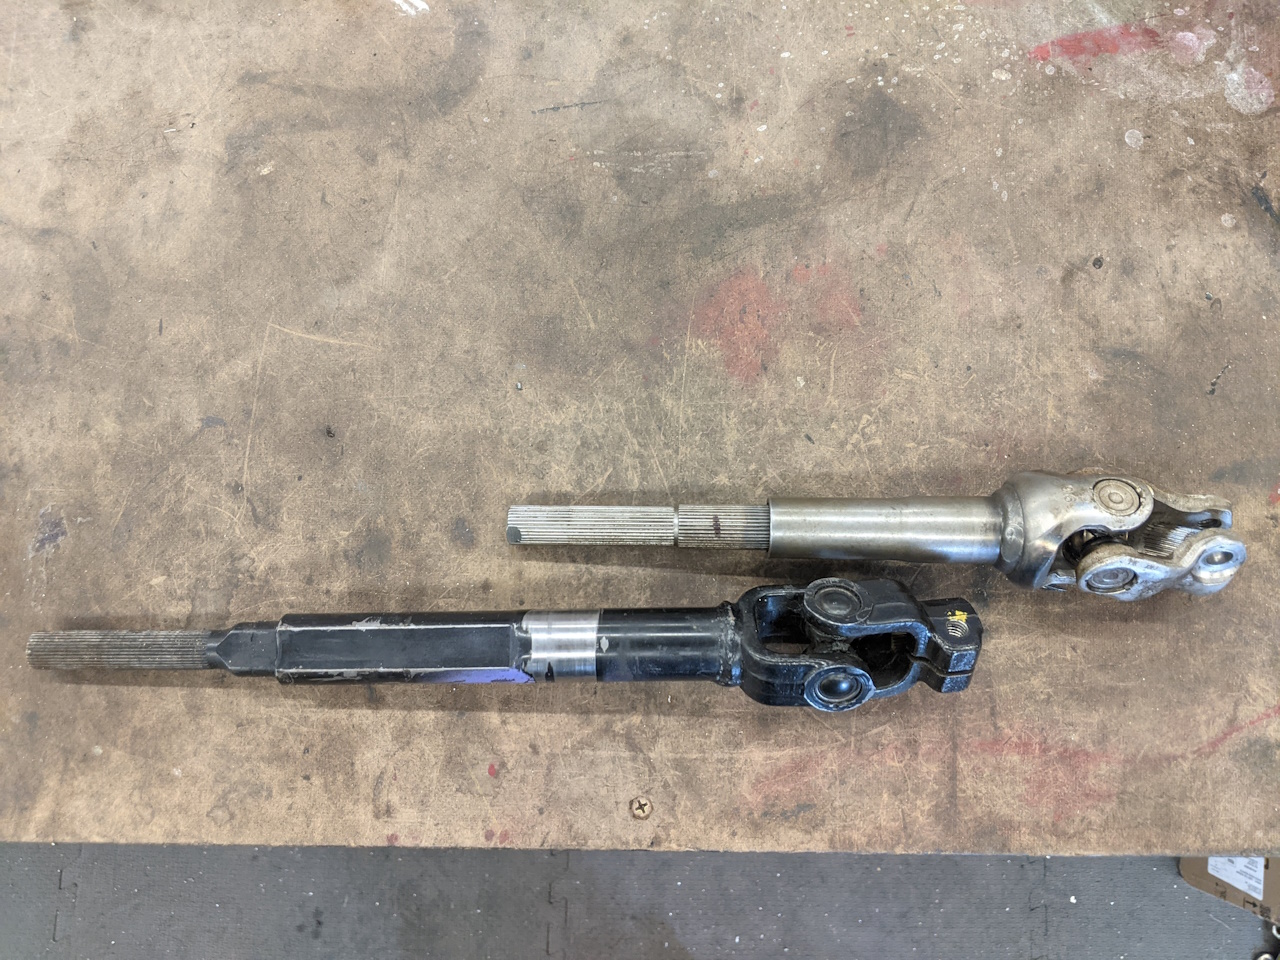 Yaris and MR2 steering shafts